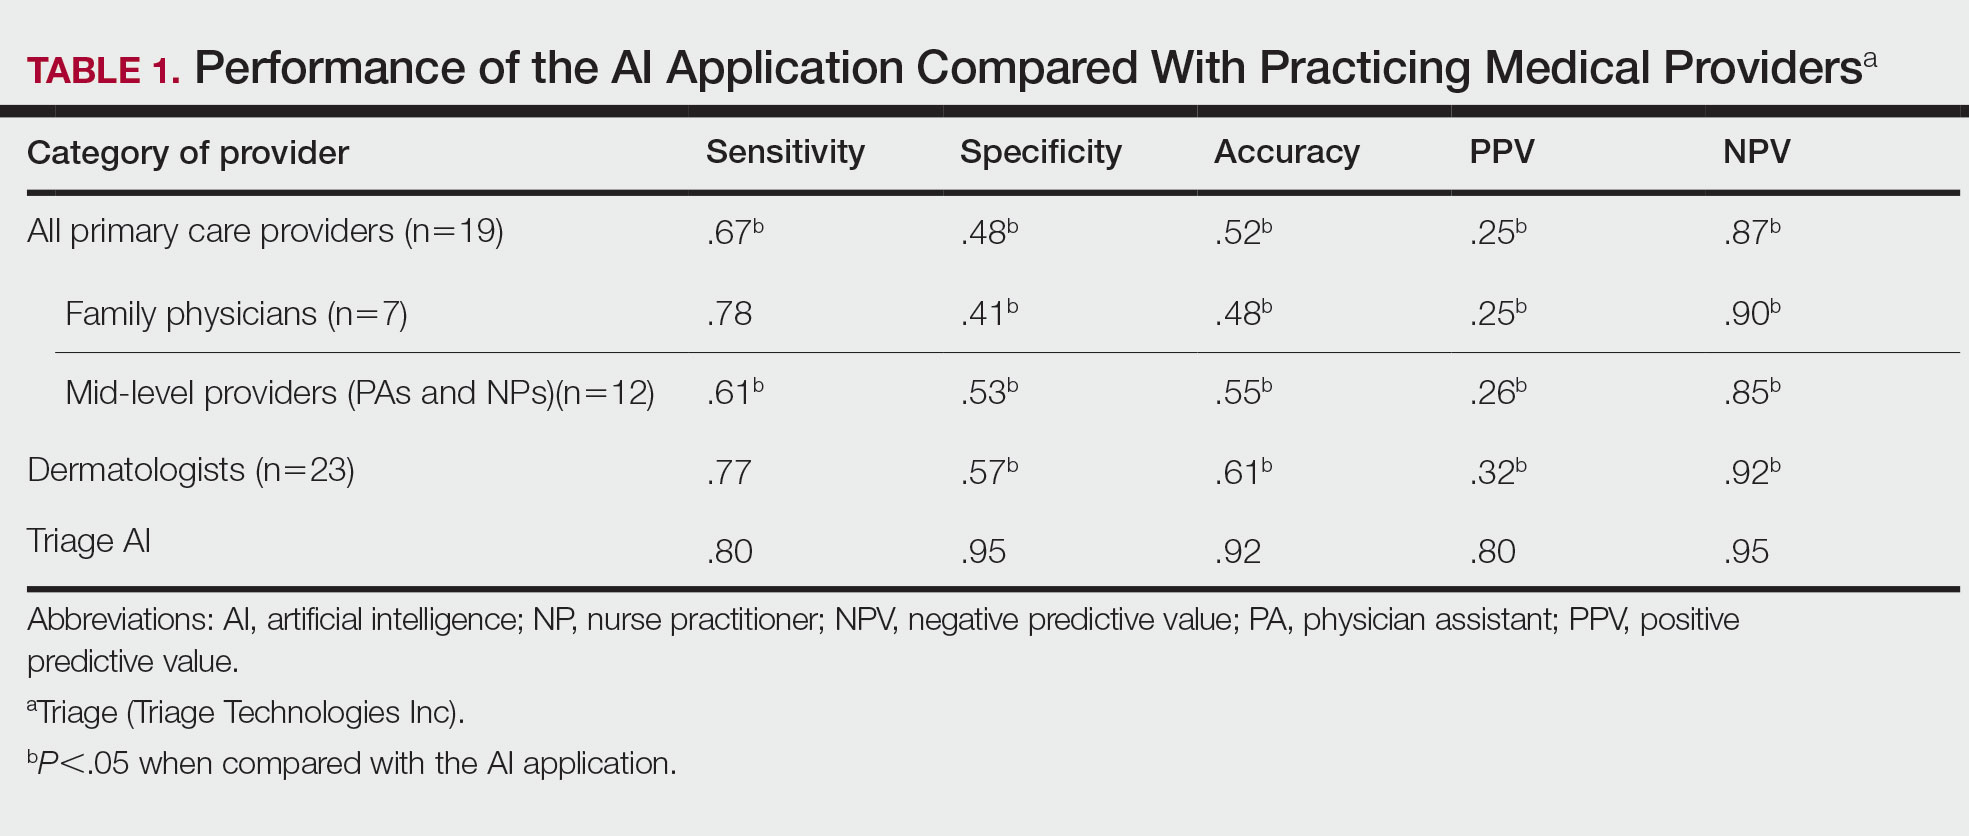 Performance of the AI Application Compared With Practicing Medical Providers